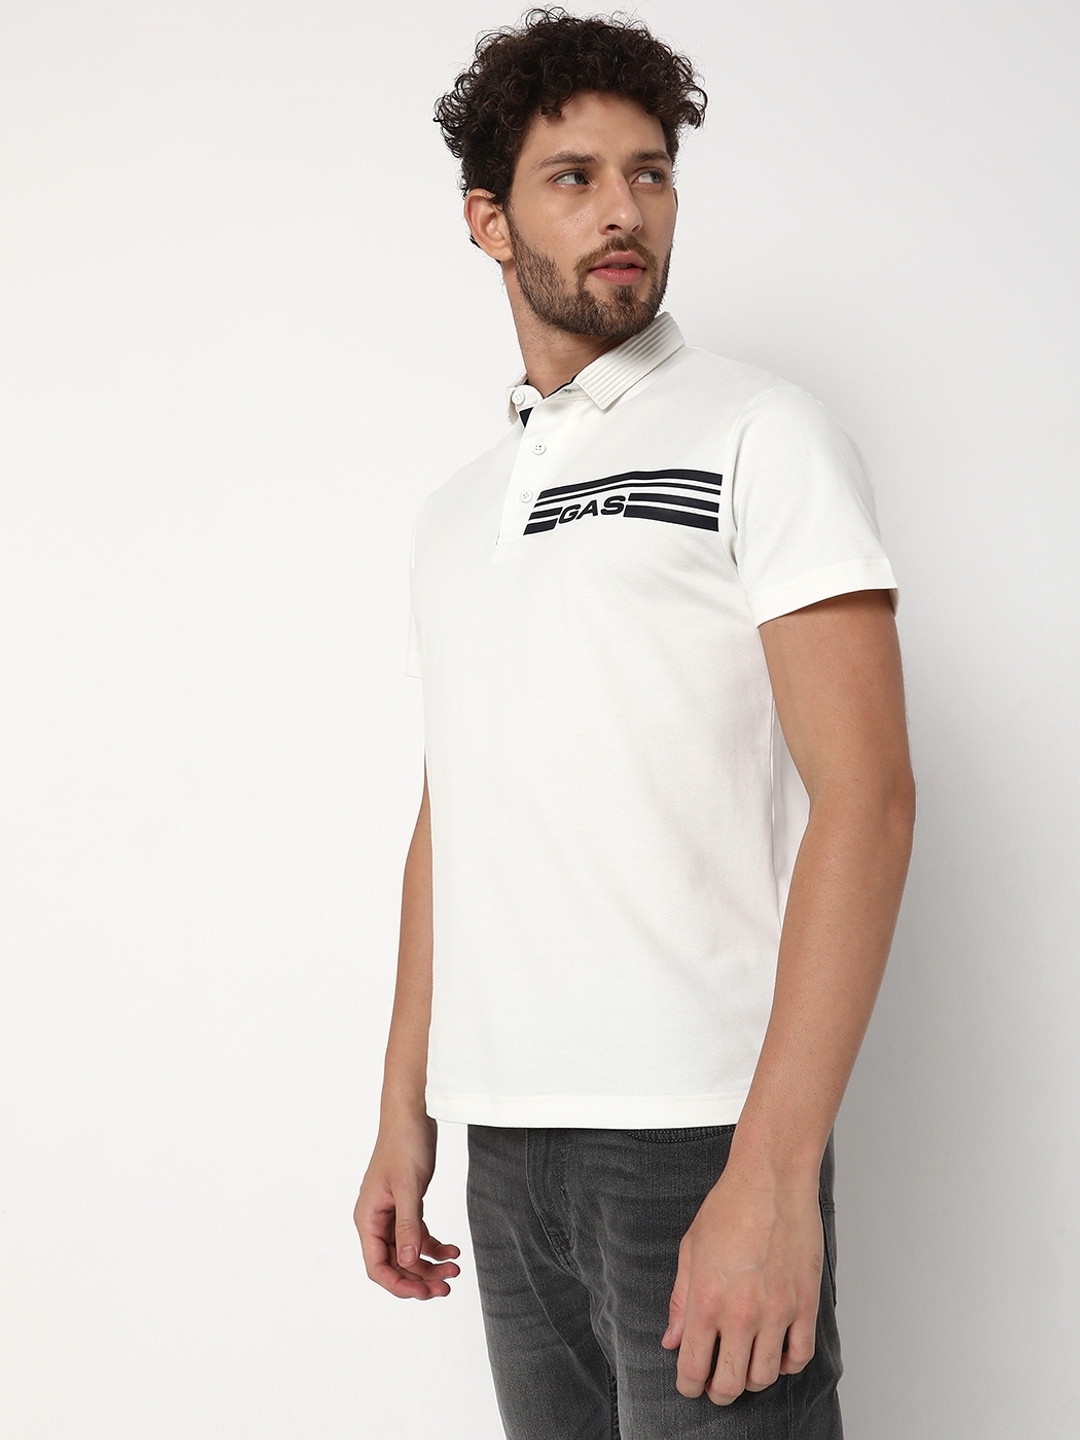 Slim Fit Short Sleeve Solid Cotton Lycra Polo T-Shirt